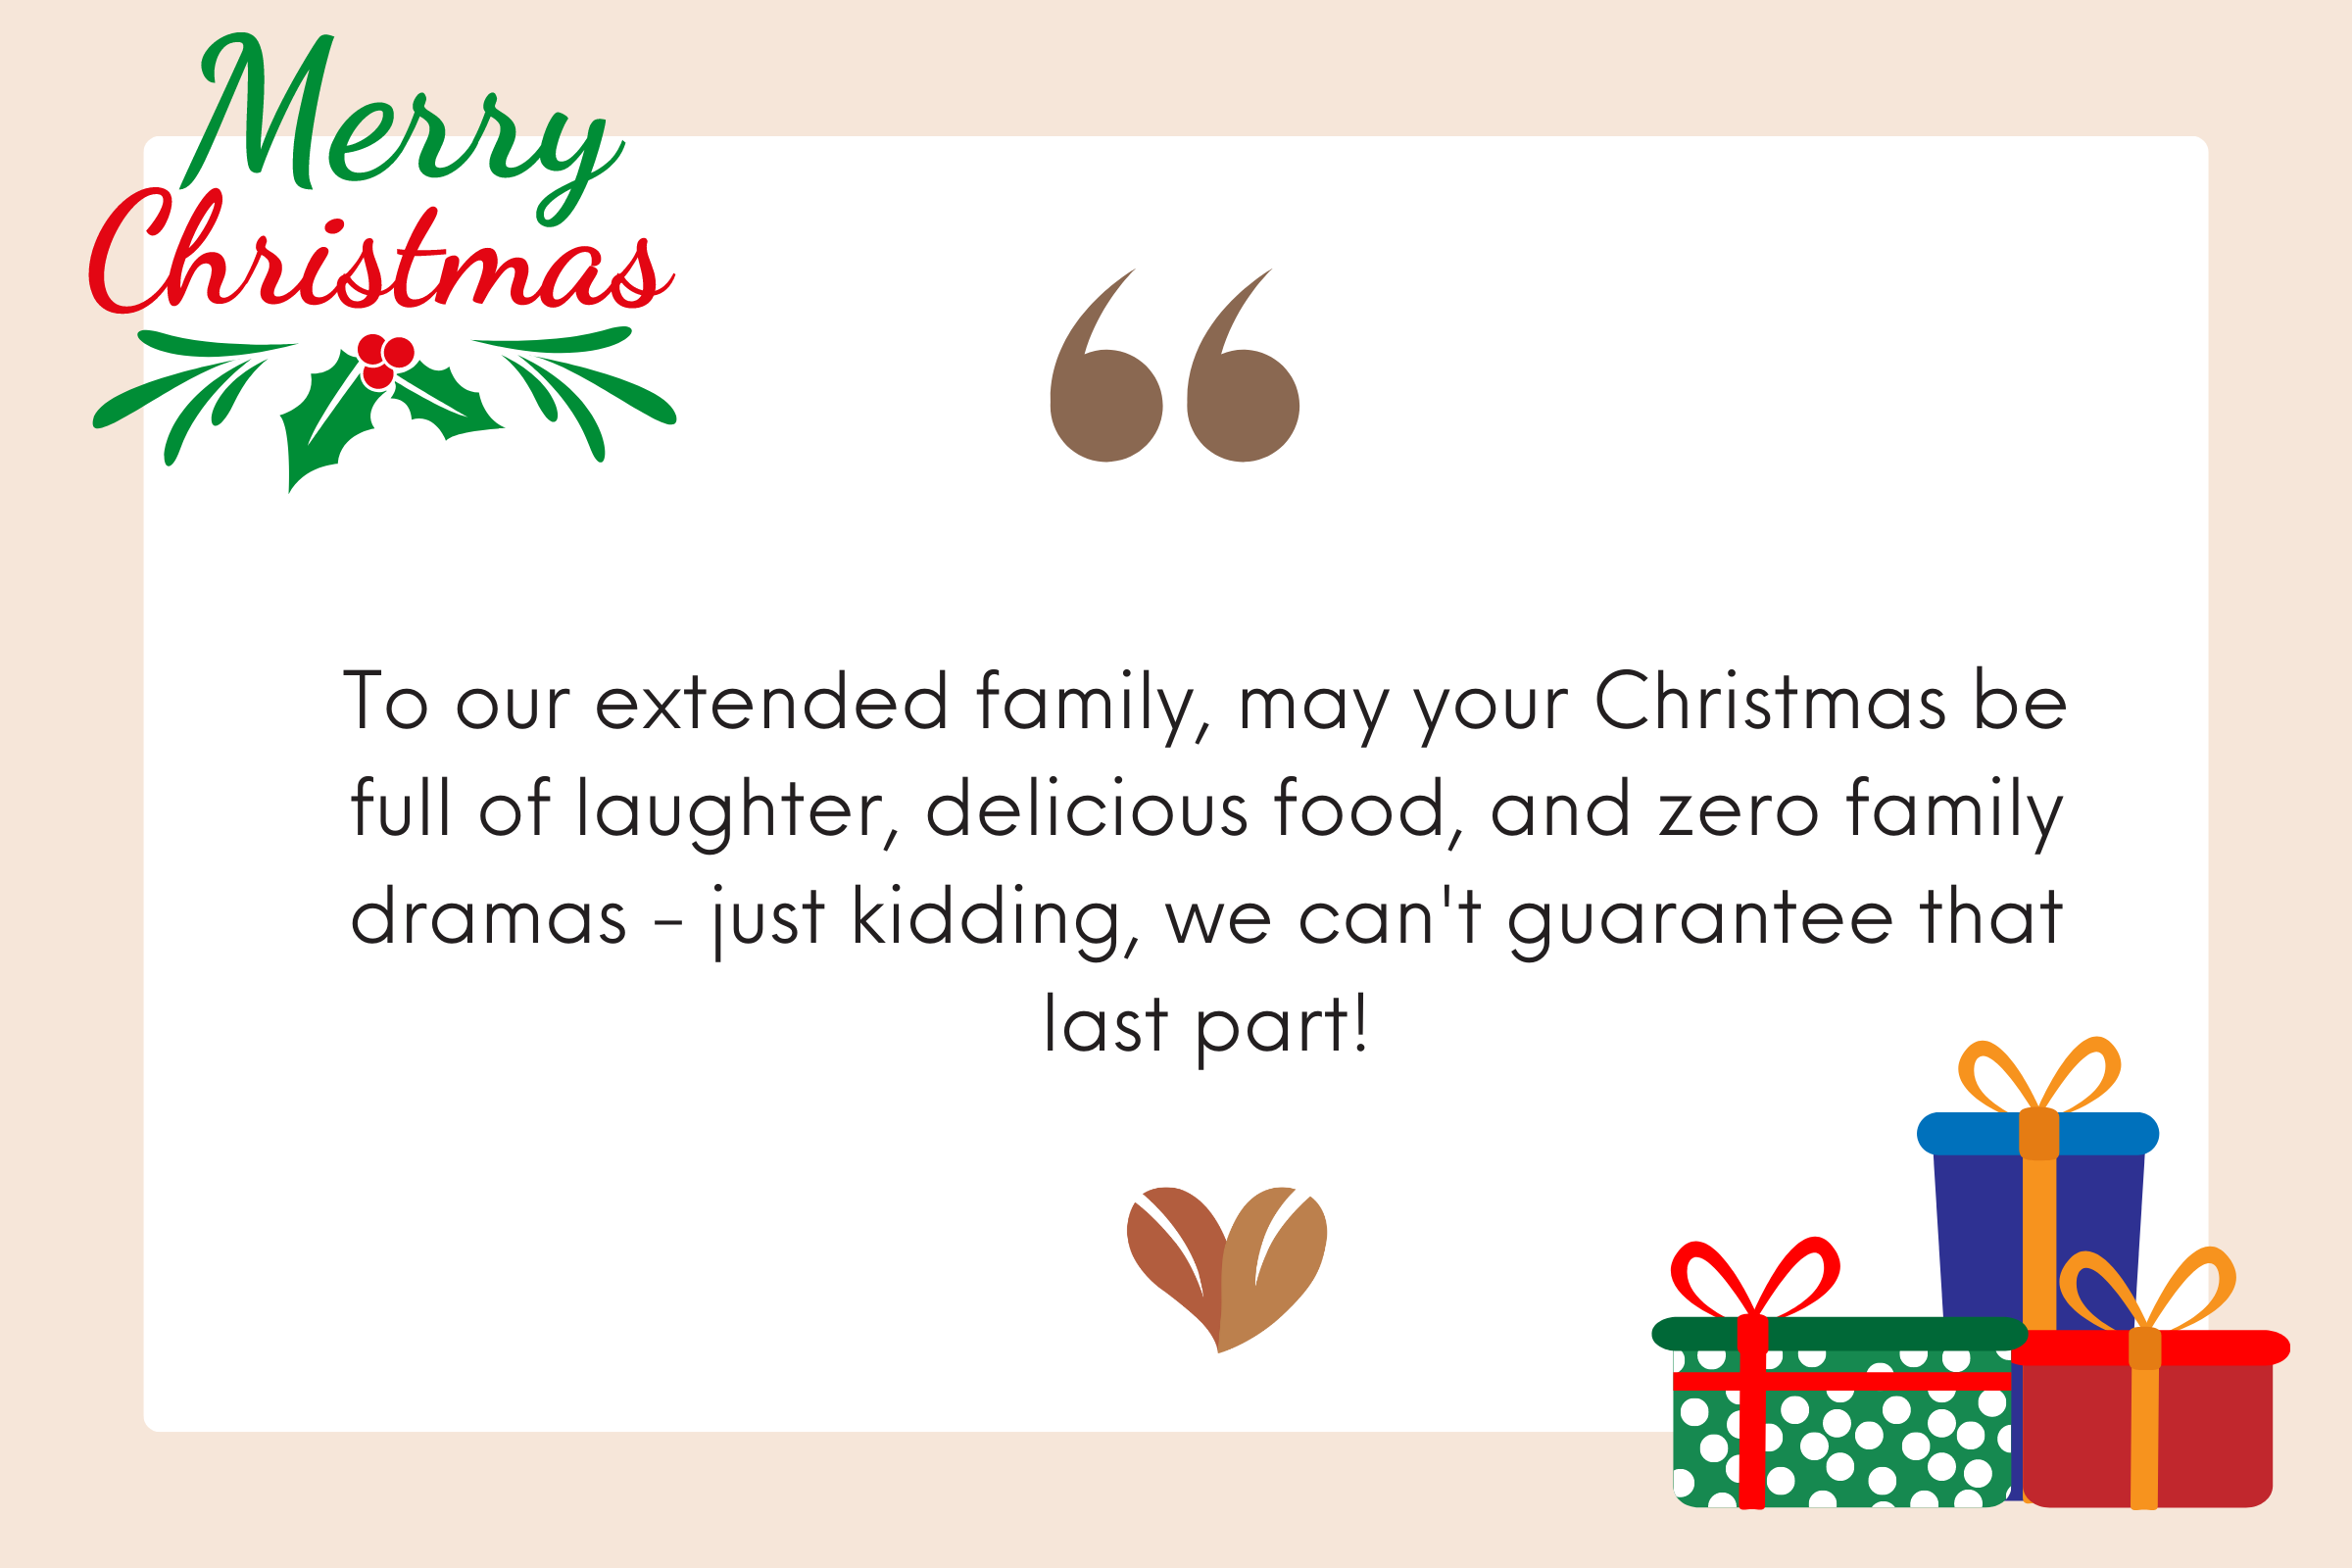 Merry christmas from our family to yours - Funny messages to send on Christmas